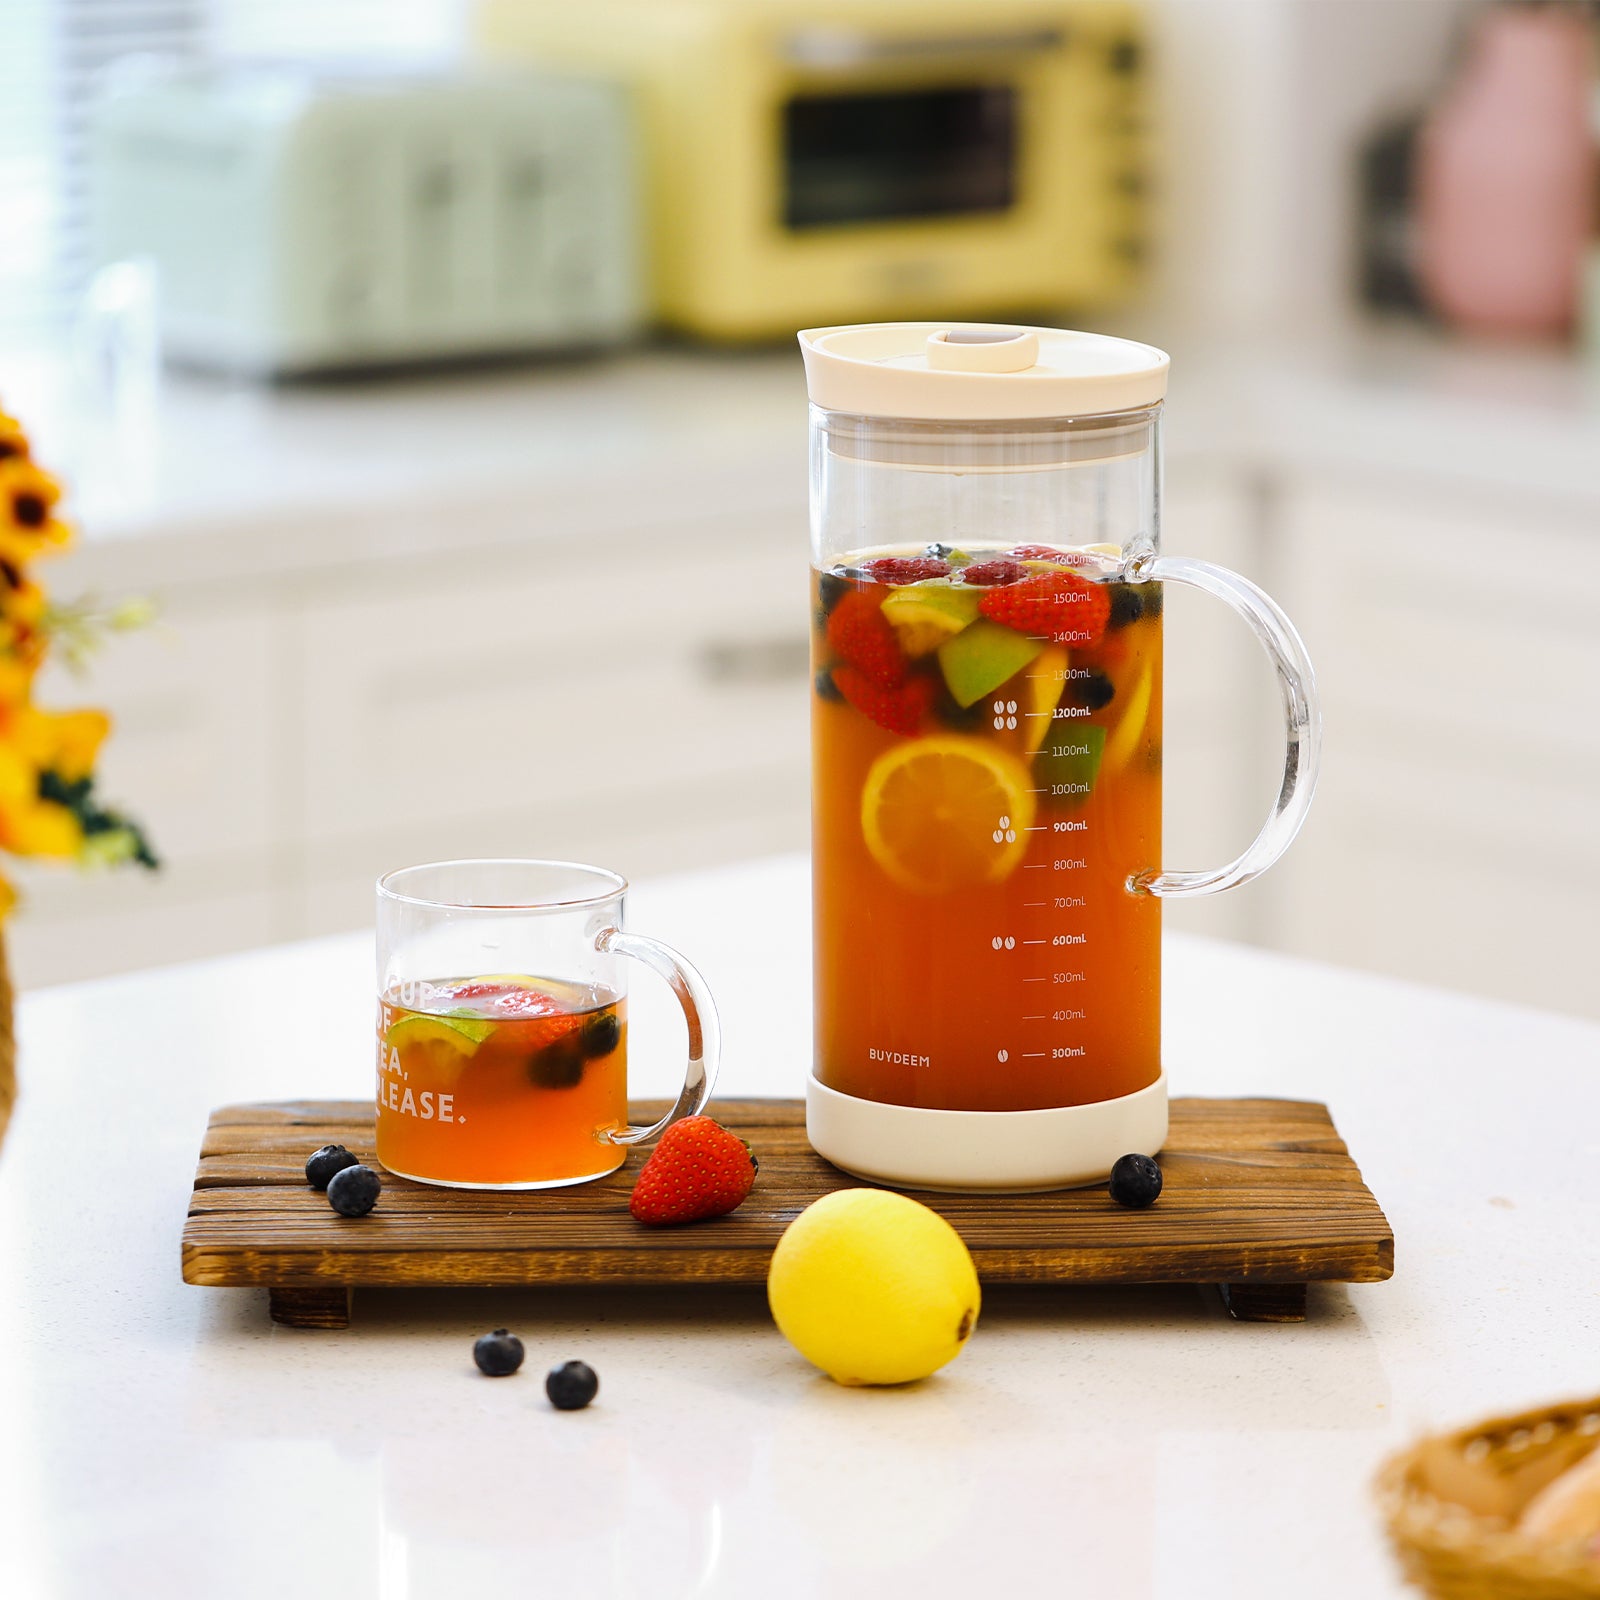 1pc High-capacity Heat-resistant Glass Water Pitcher For Cold/hot Water, Tea,  Fruit Juice, With Infuser For Flower Tea